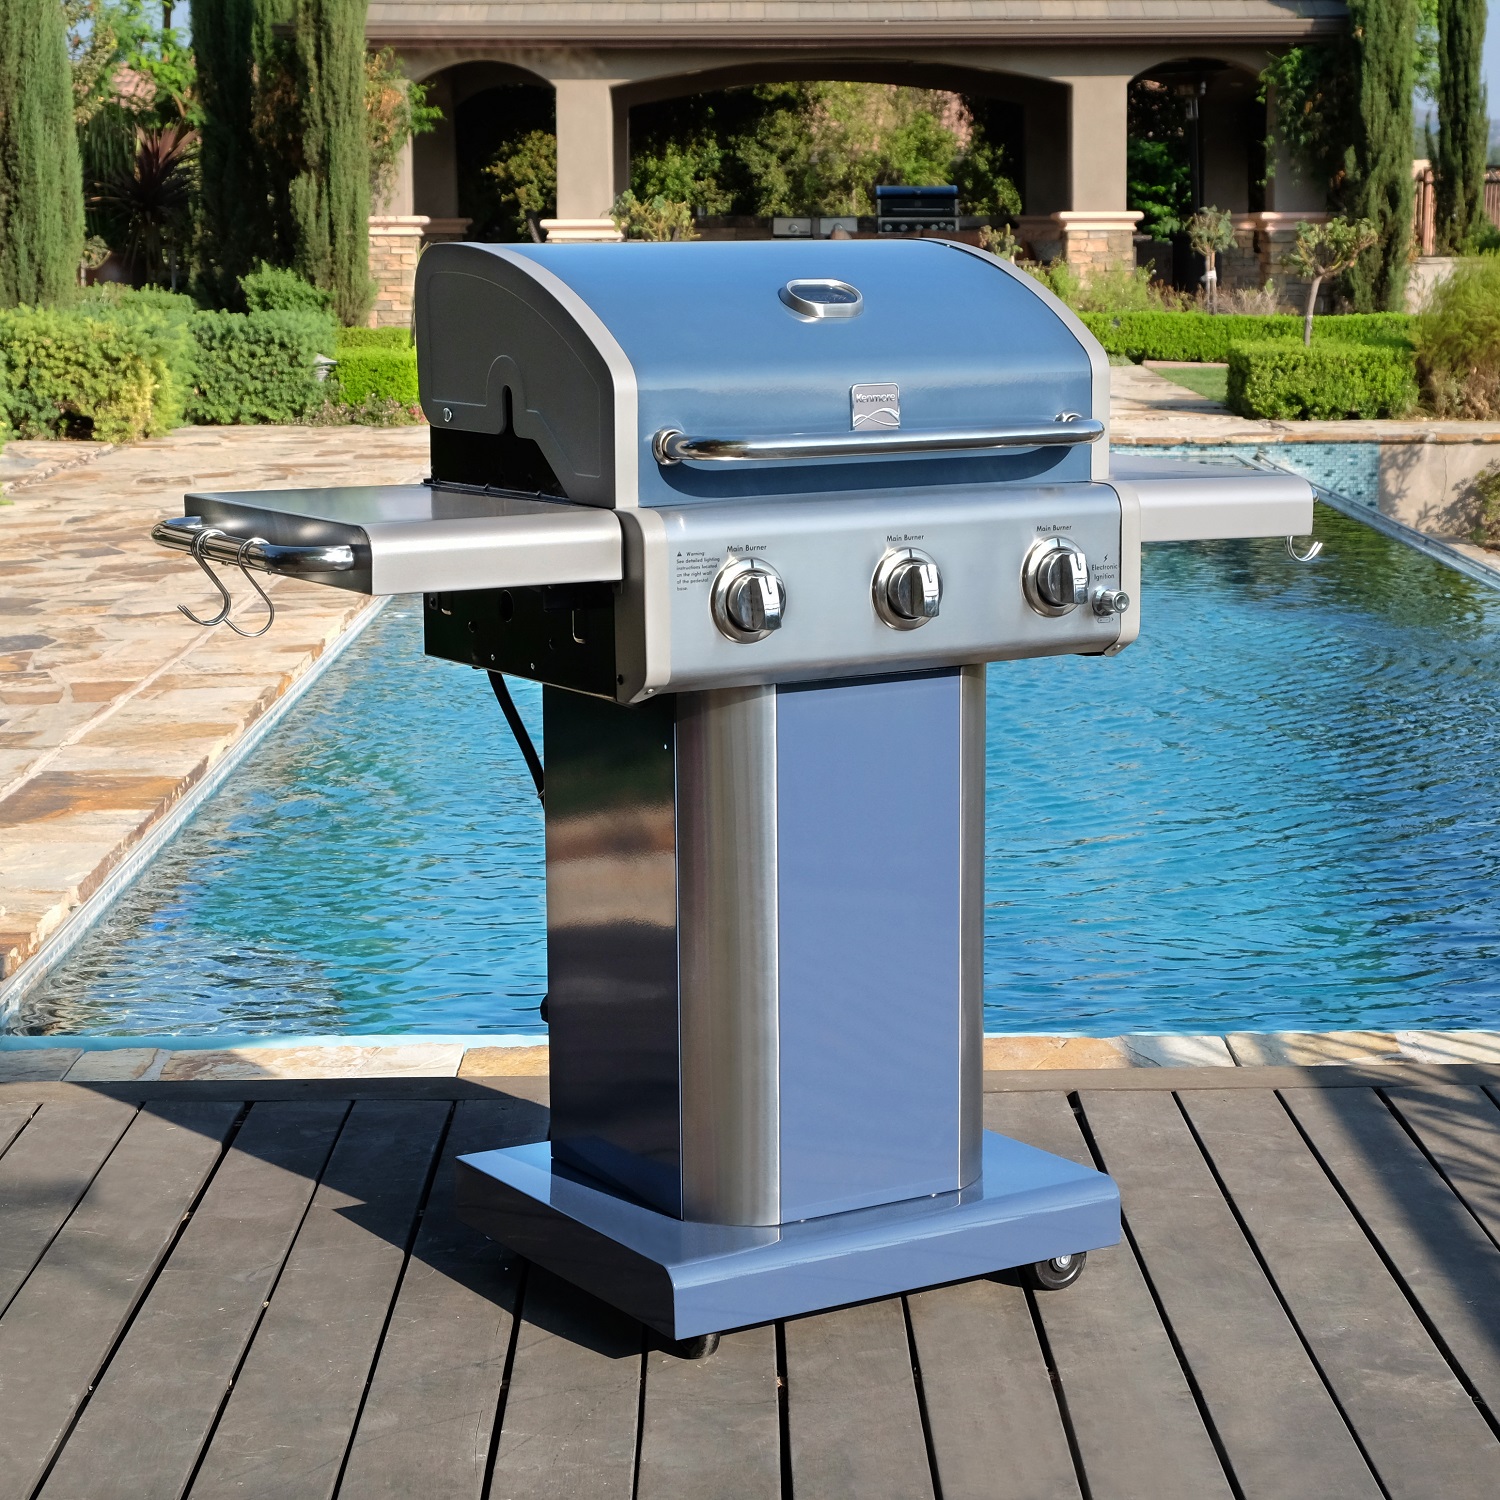 Kenmore 3-Burner Gas Grill, Outdoor BBQ Grill, Propane Grill with Foldable Side Tables, Azure Blue - image 3 of 12